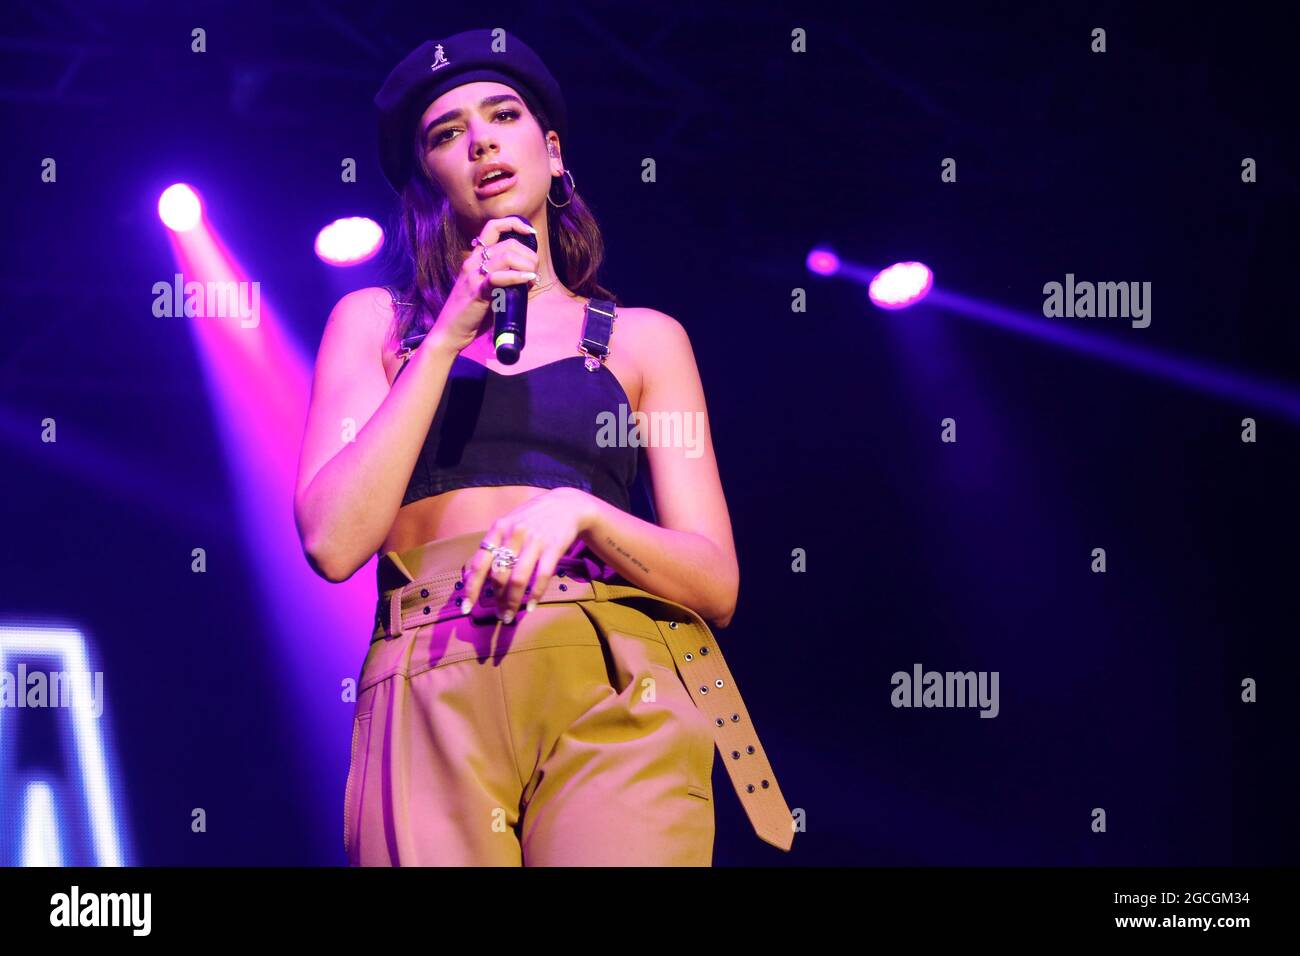 British Singer Dua Lipa performs on the stage during an Pentaport Rock Festival 2017 in Incheon, South Korea. Stock Photo